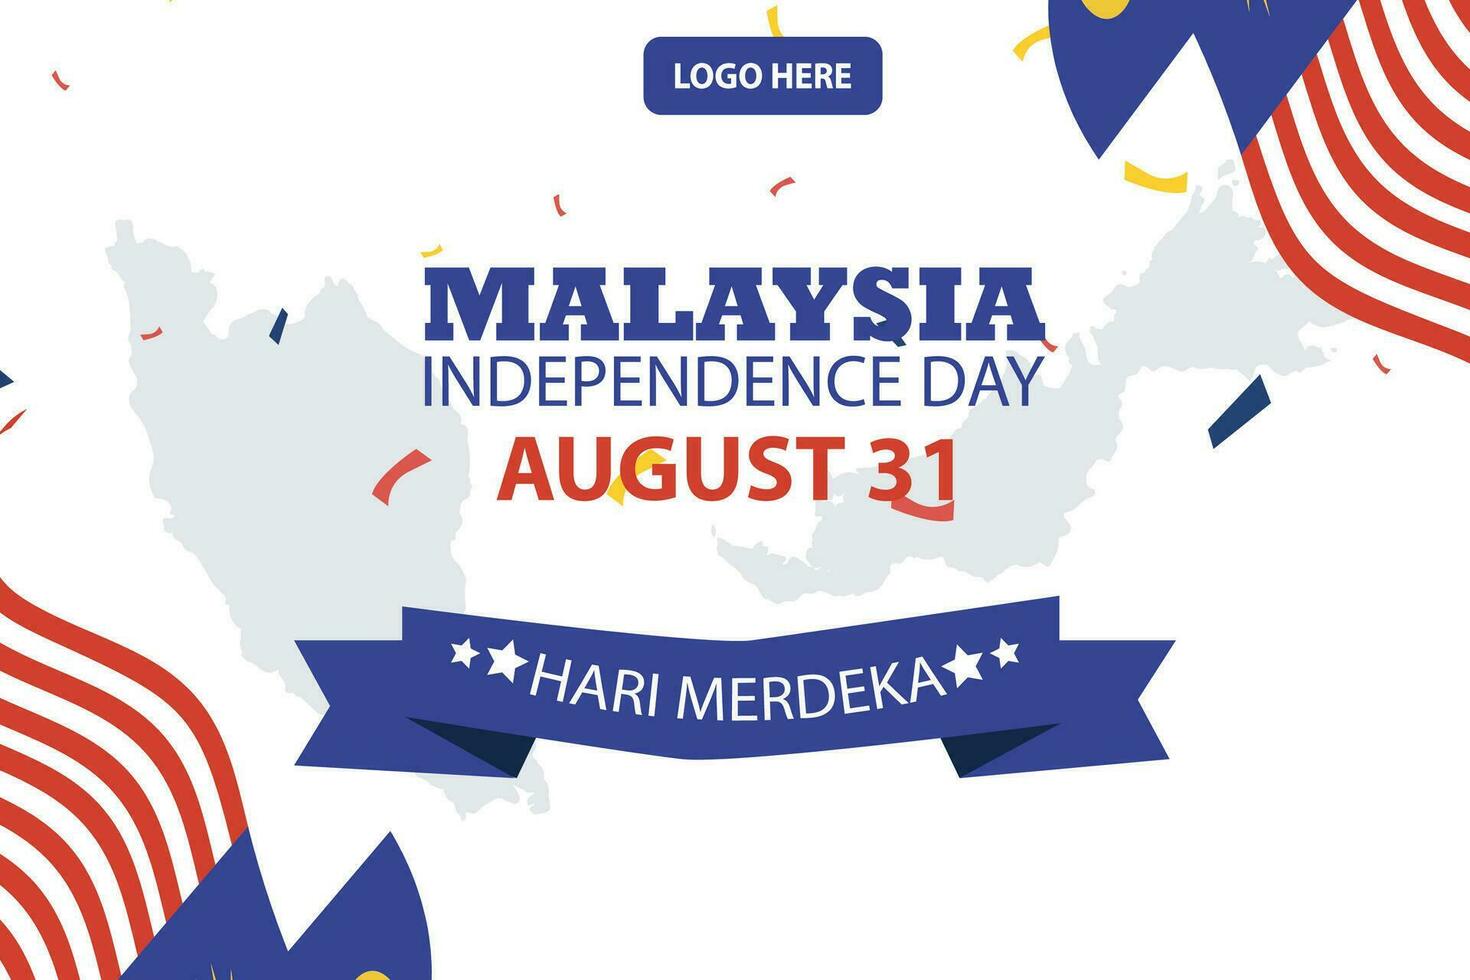 happy independence day Malaysia 31 august. banner, social media post, flyer or greeting card with the theme of blue red struggle and flag of Malaysia. vector illustration